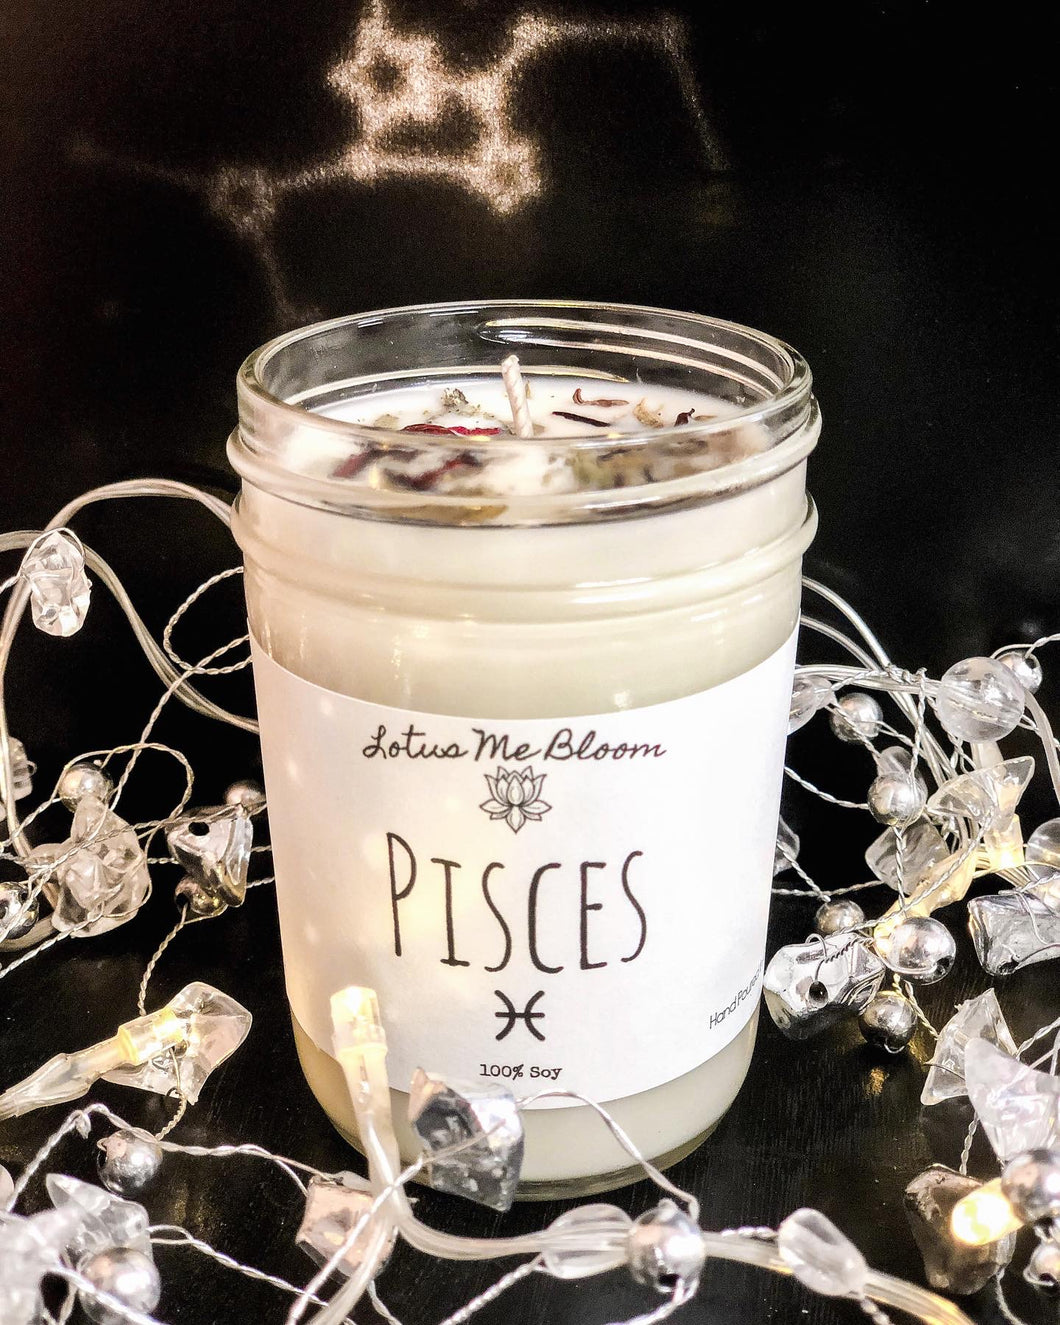 Pisces Candles